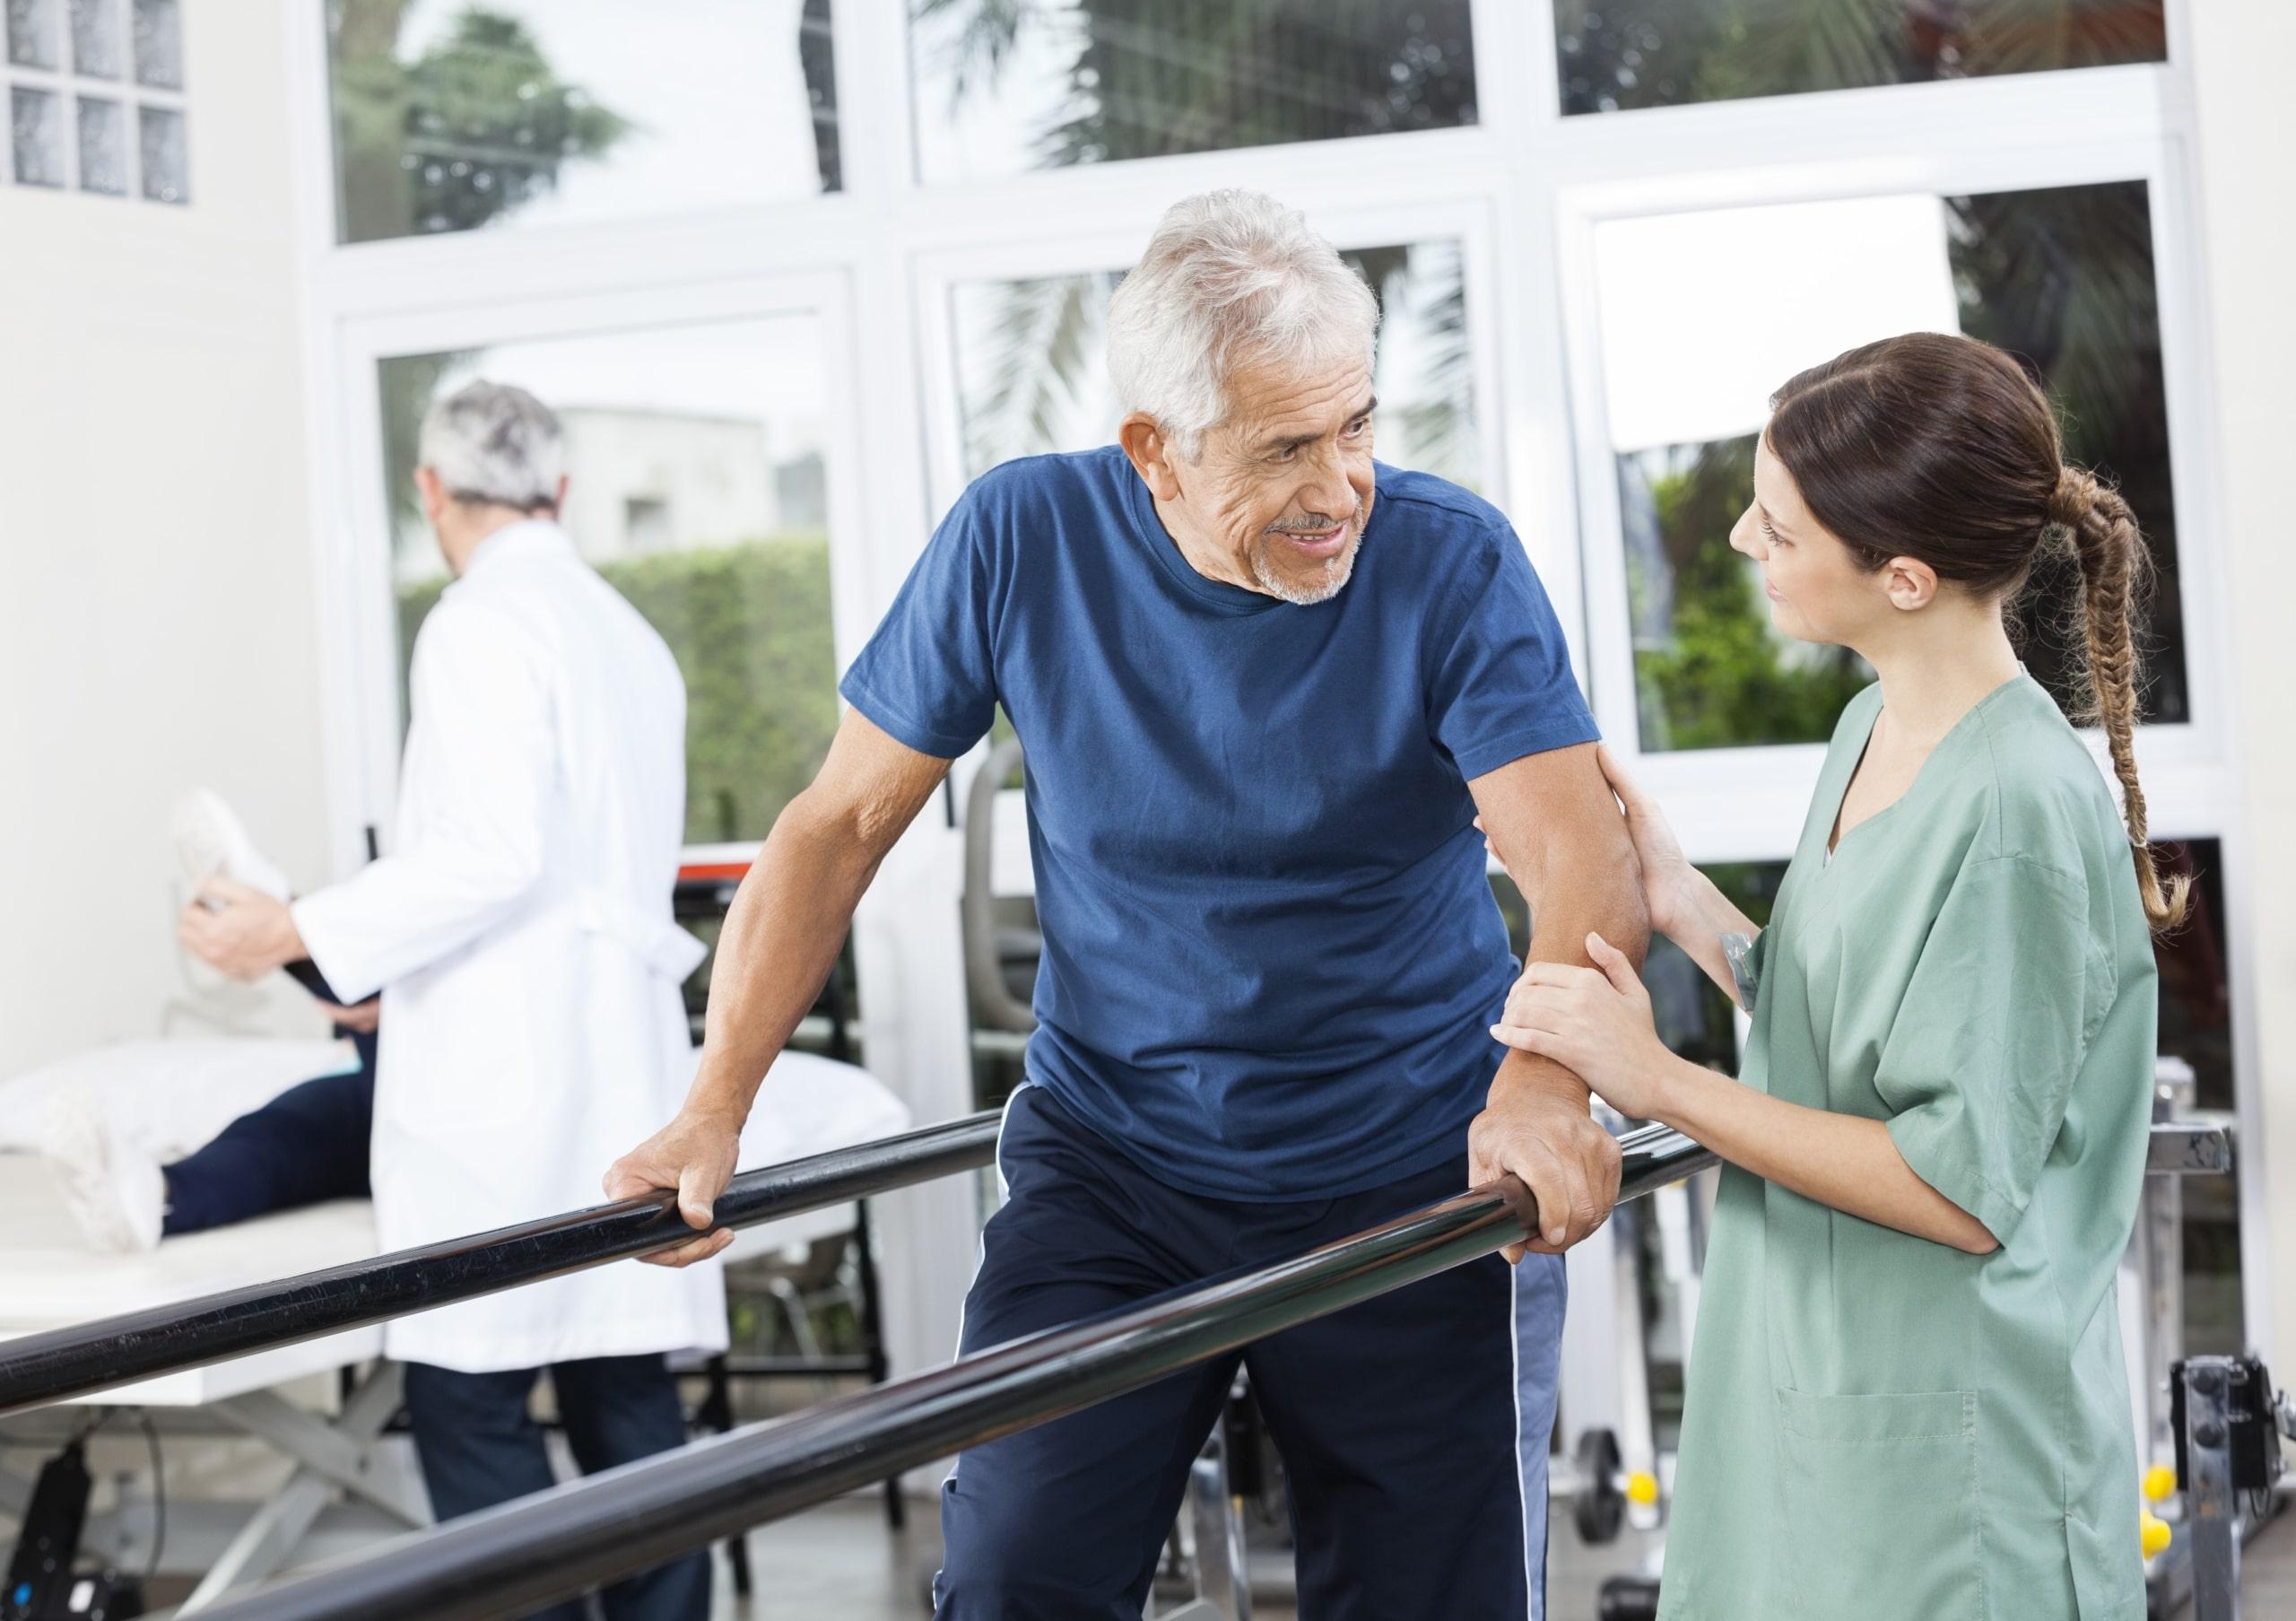 Elderly patient doing gait training exercises in physical therapy